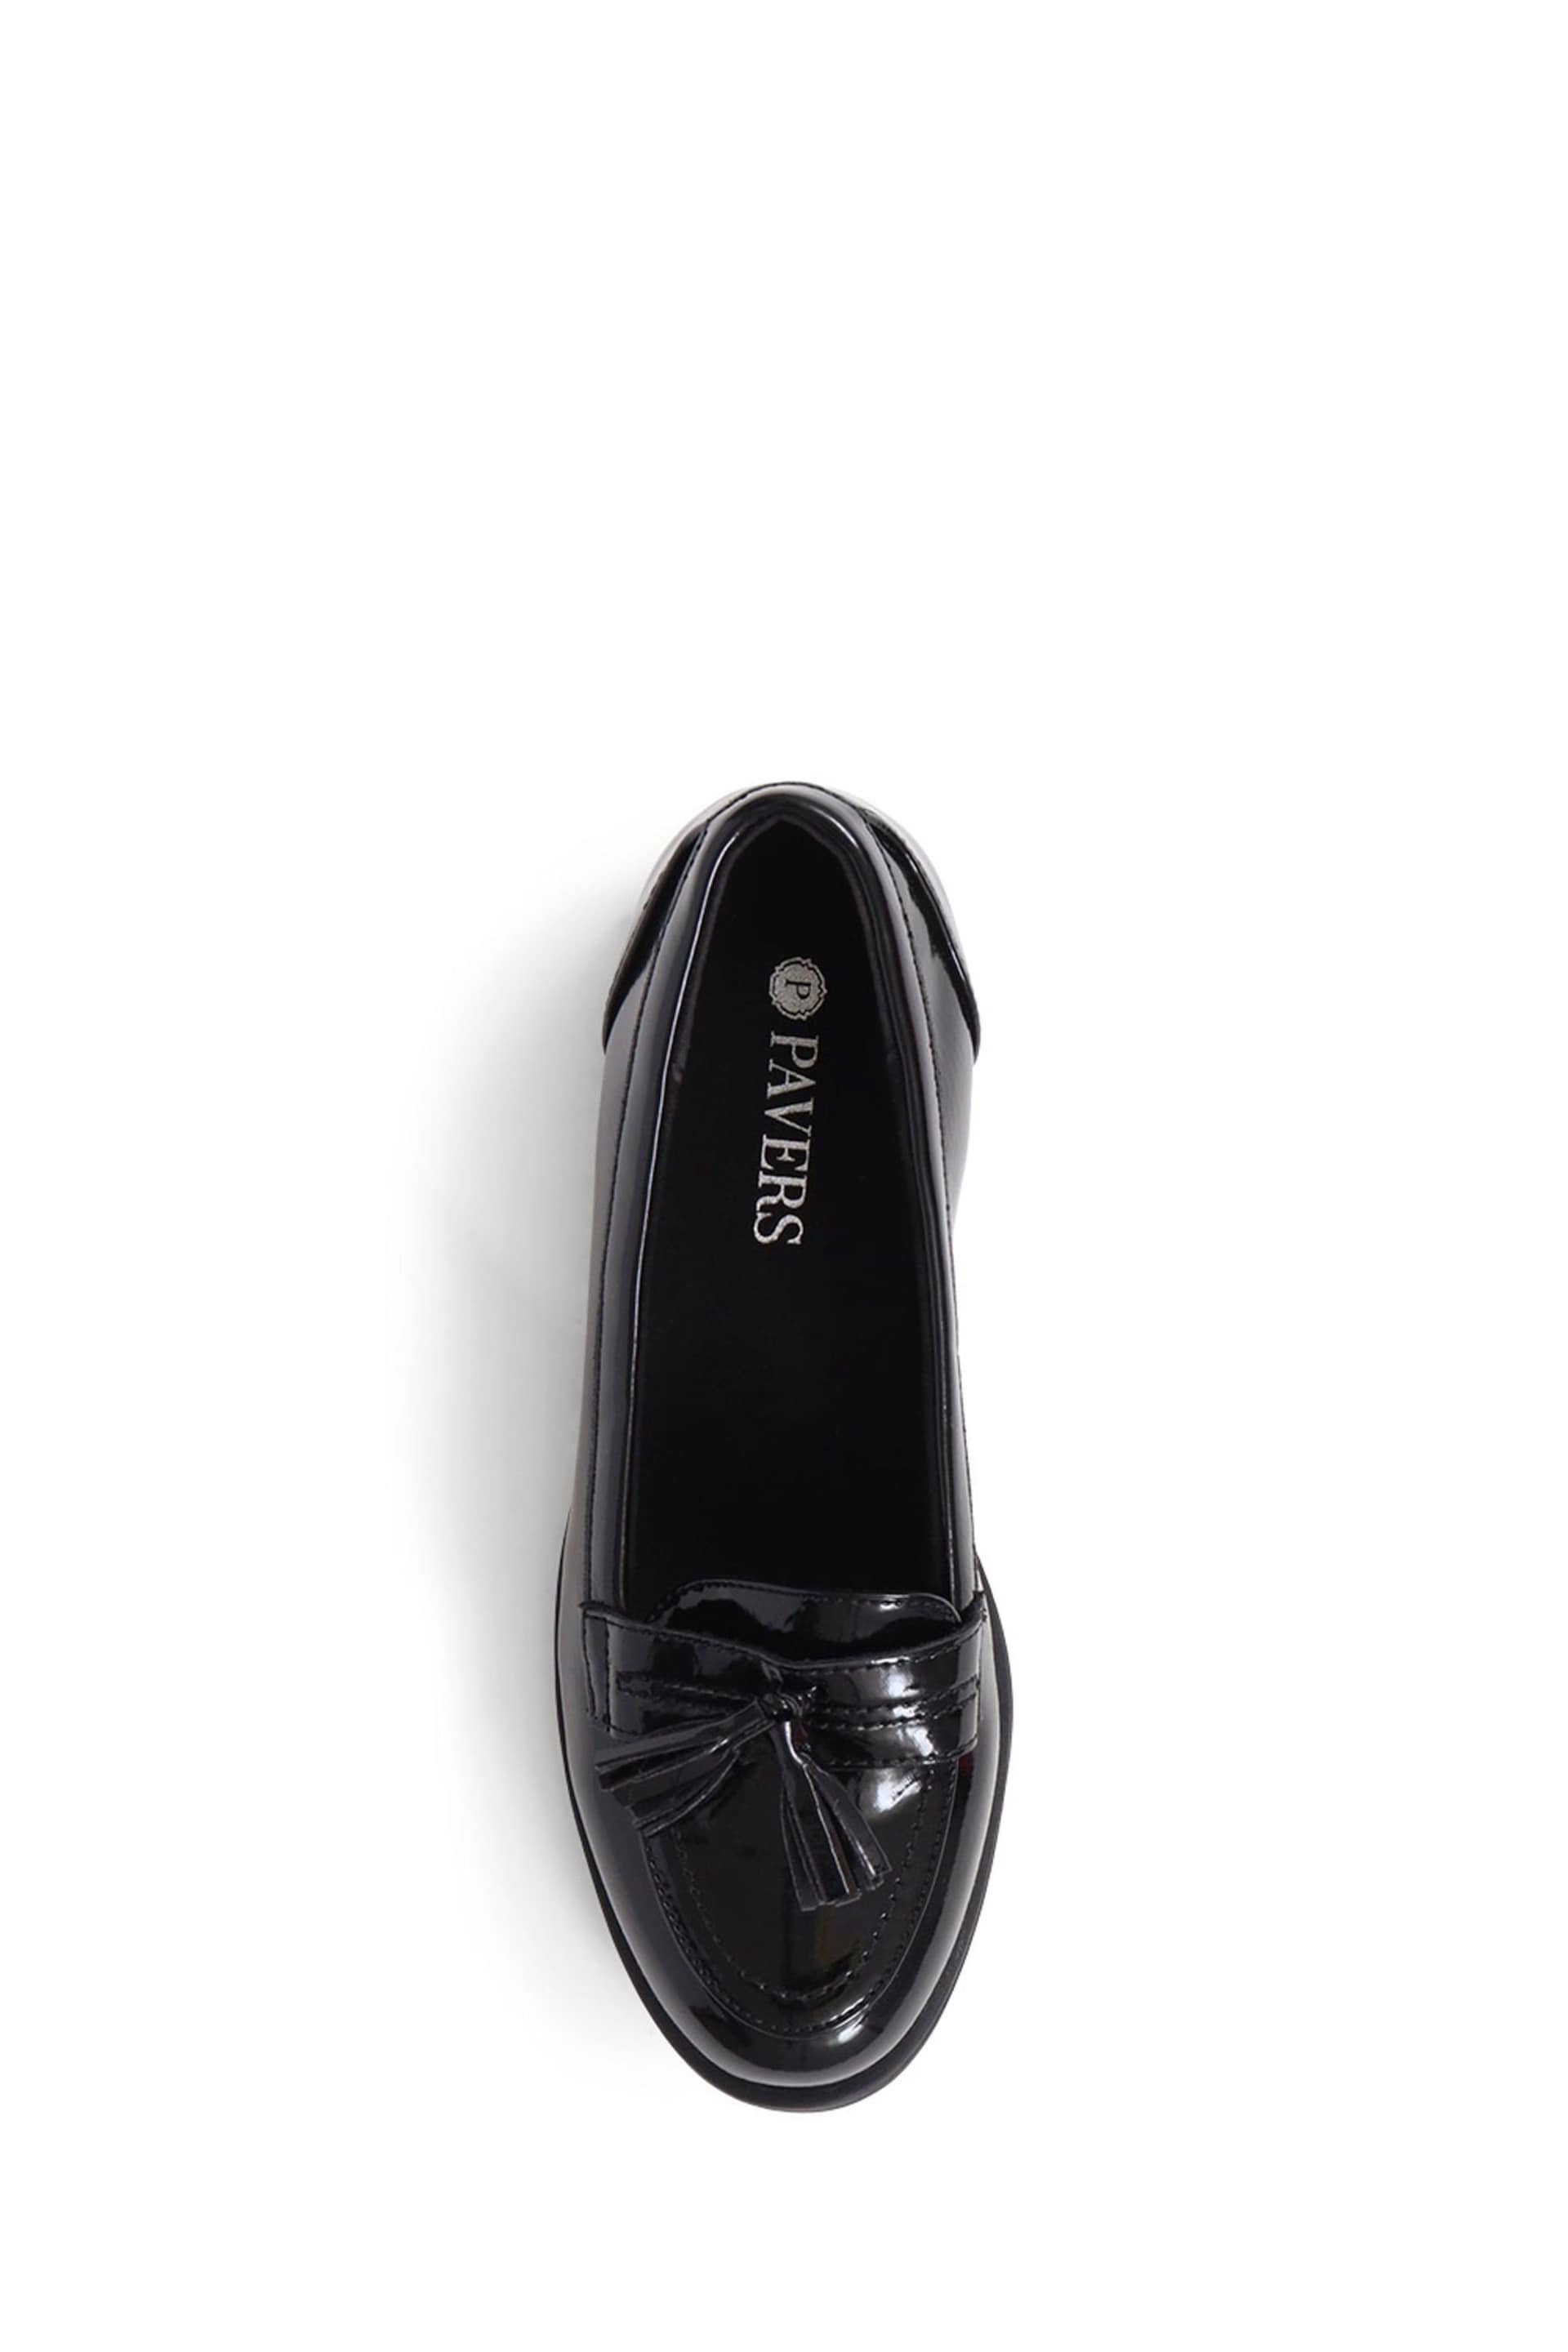 Pavers Smart Patent Black Loafers - Image 3 of 5